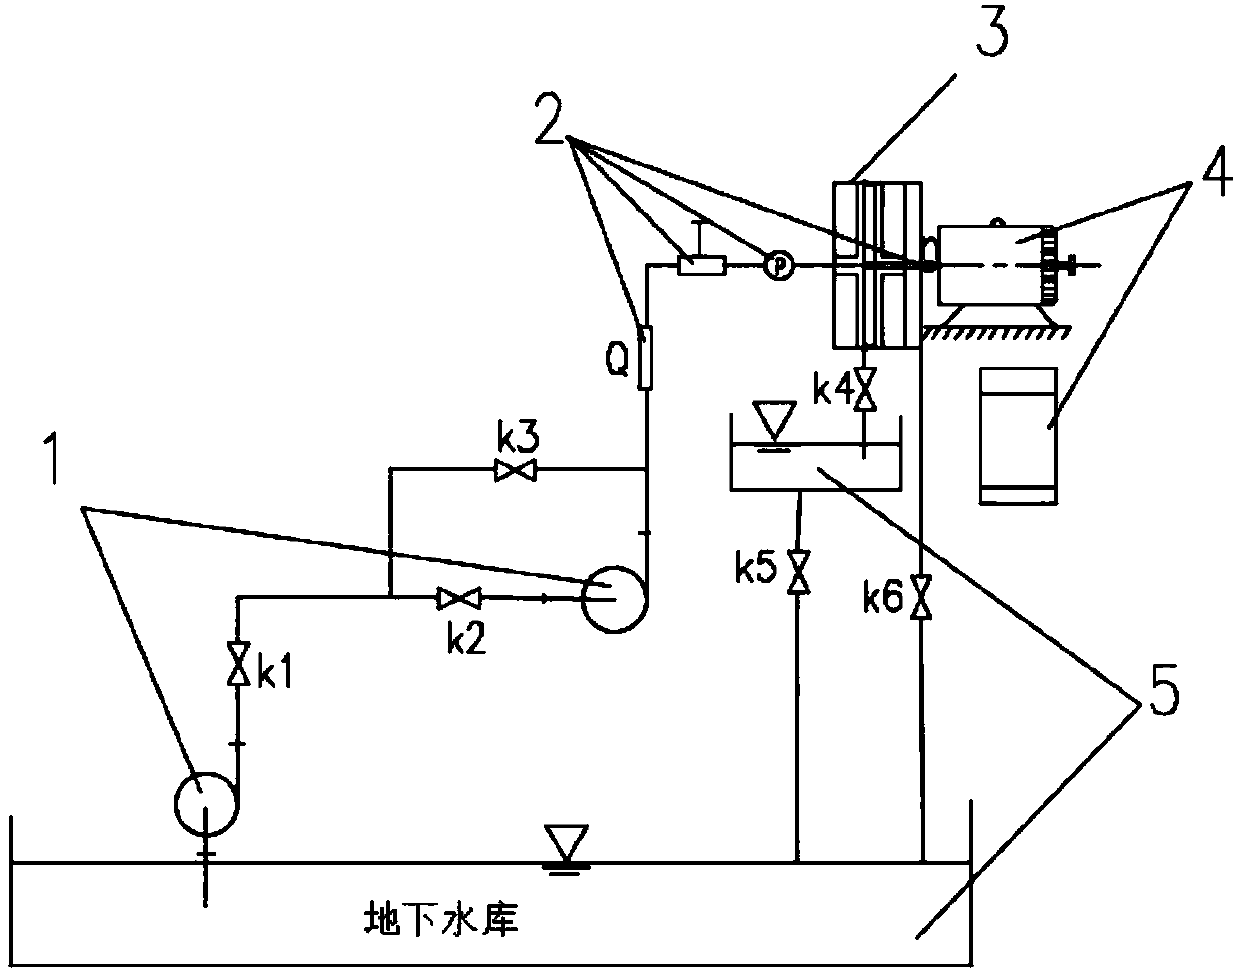 Rotating disk cavitation and erosion experiment apparatus and method thereof